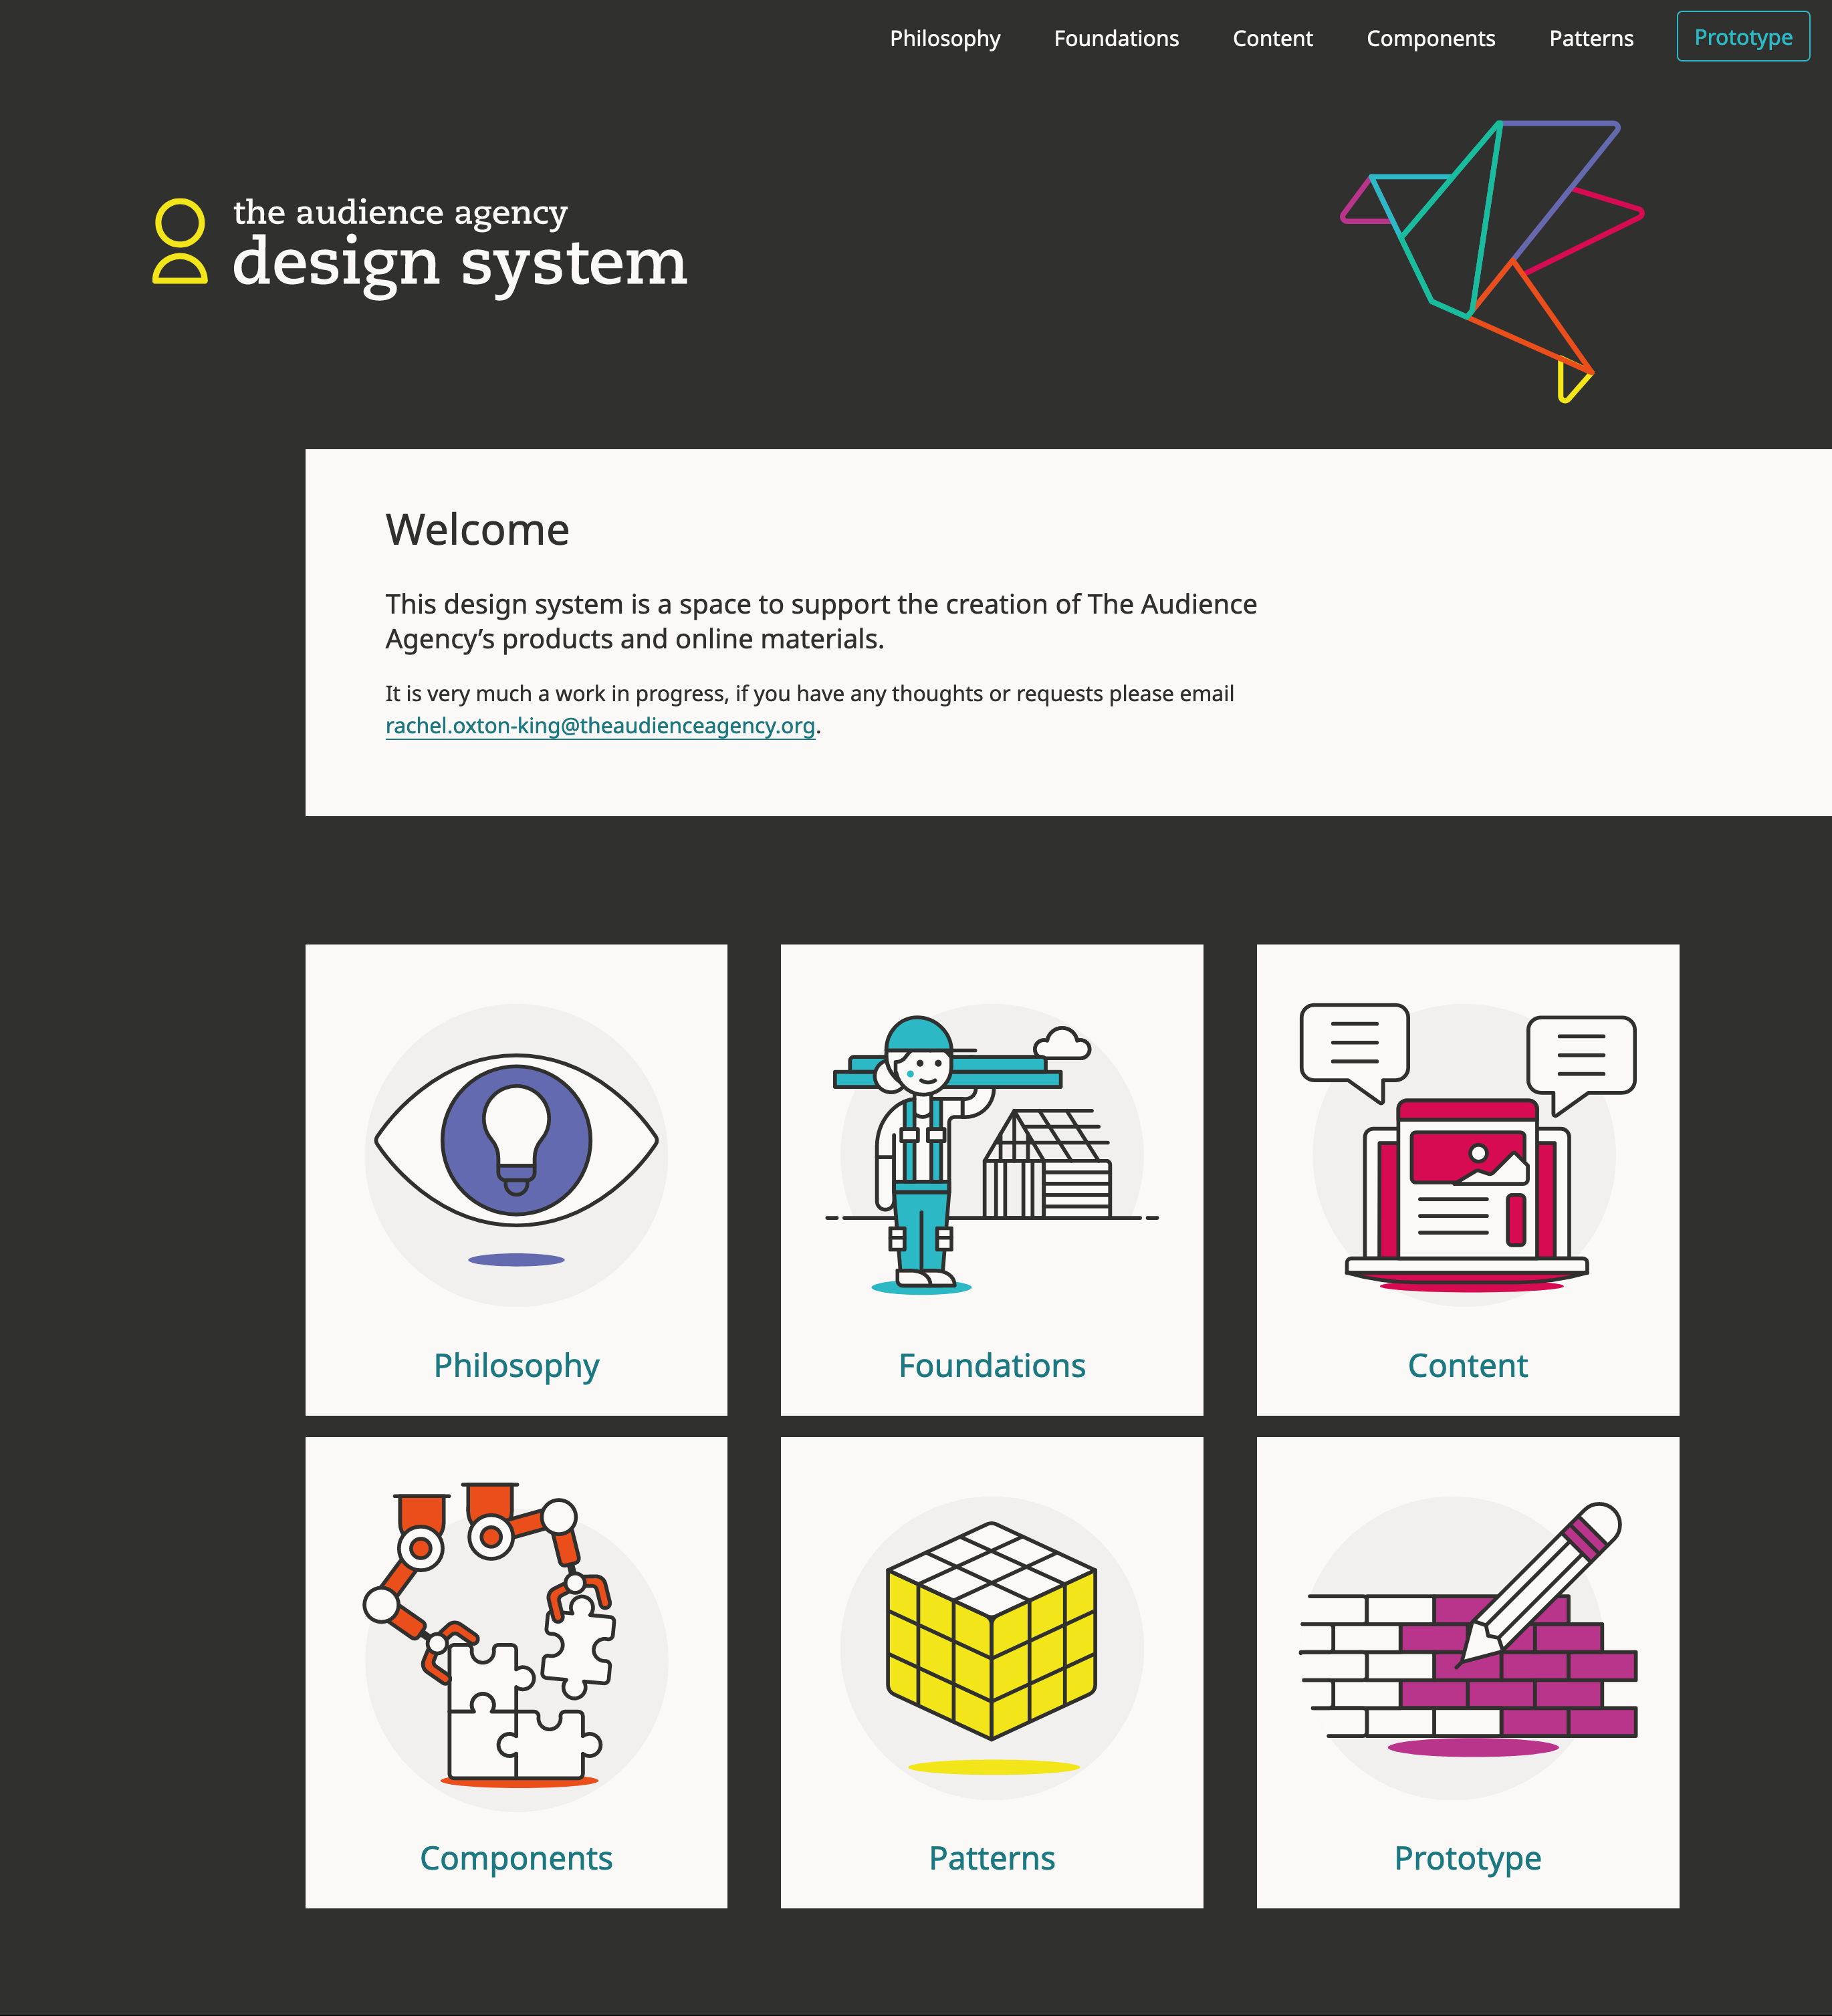 Screenshot showing The Audience Agency Design System with sections Philosophy, Foundations, Content, Components, Patterns and Prototypes